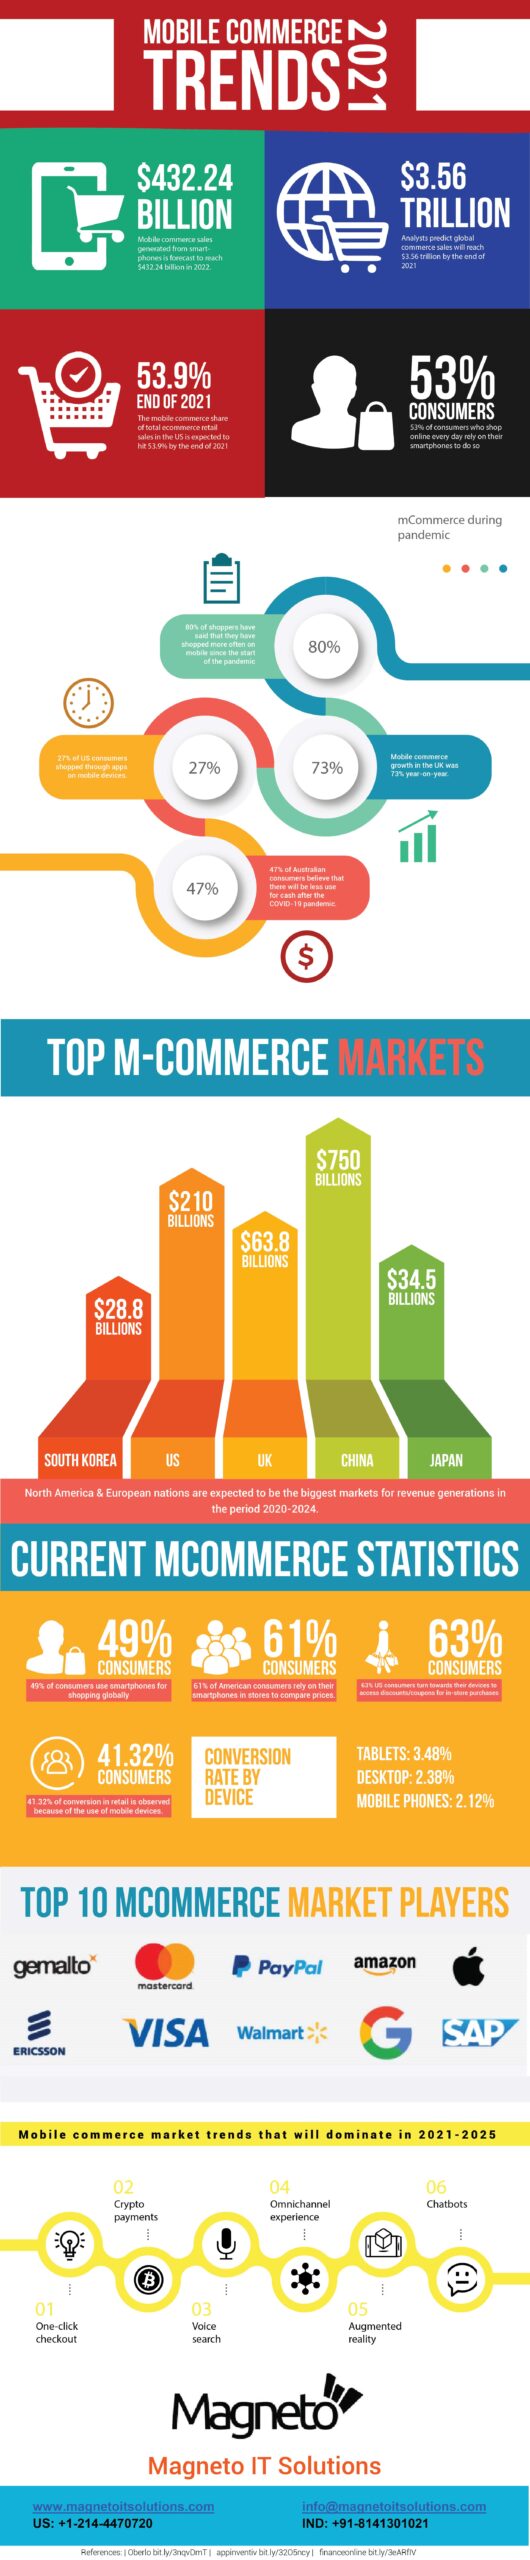 Mobile-commerce-trends-2021-2